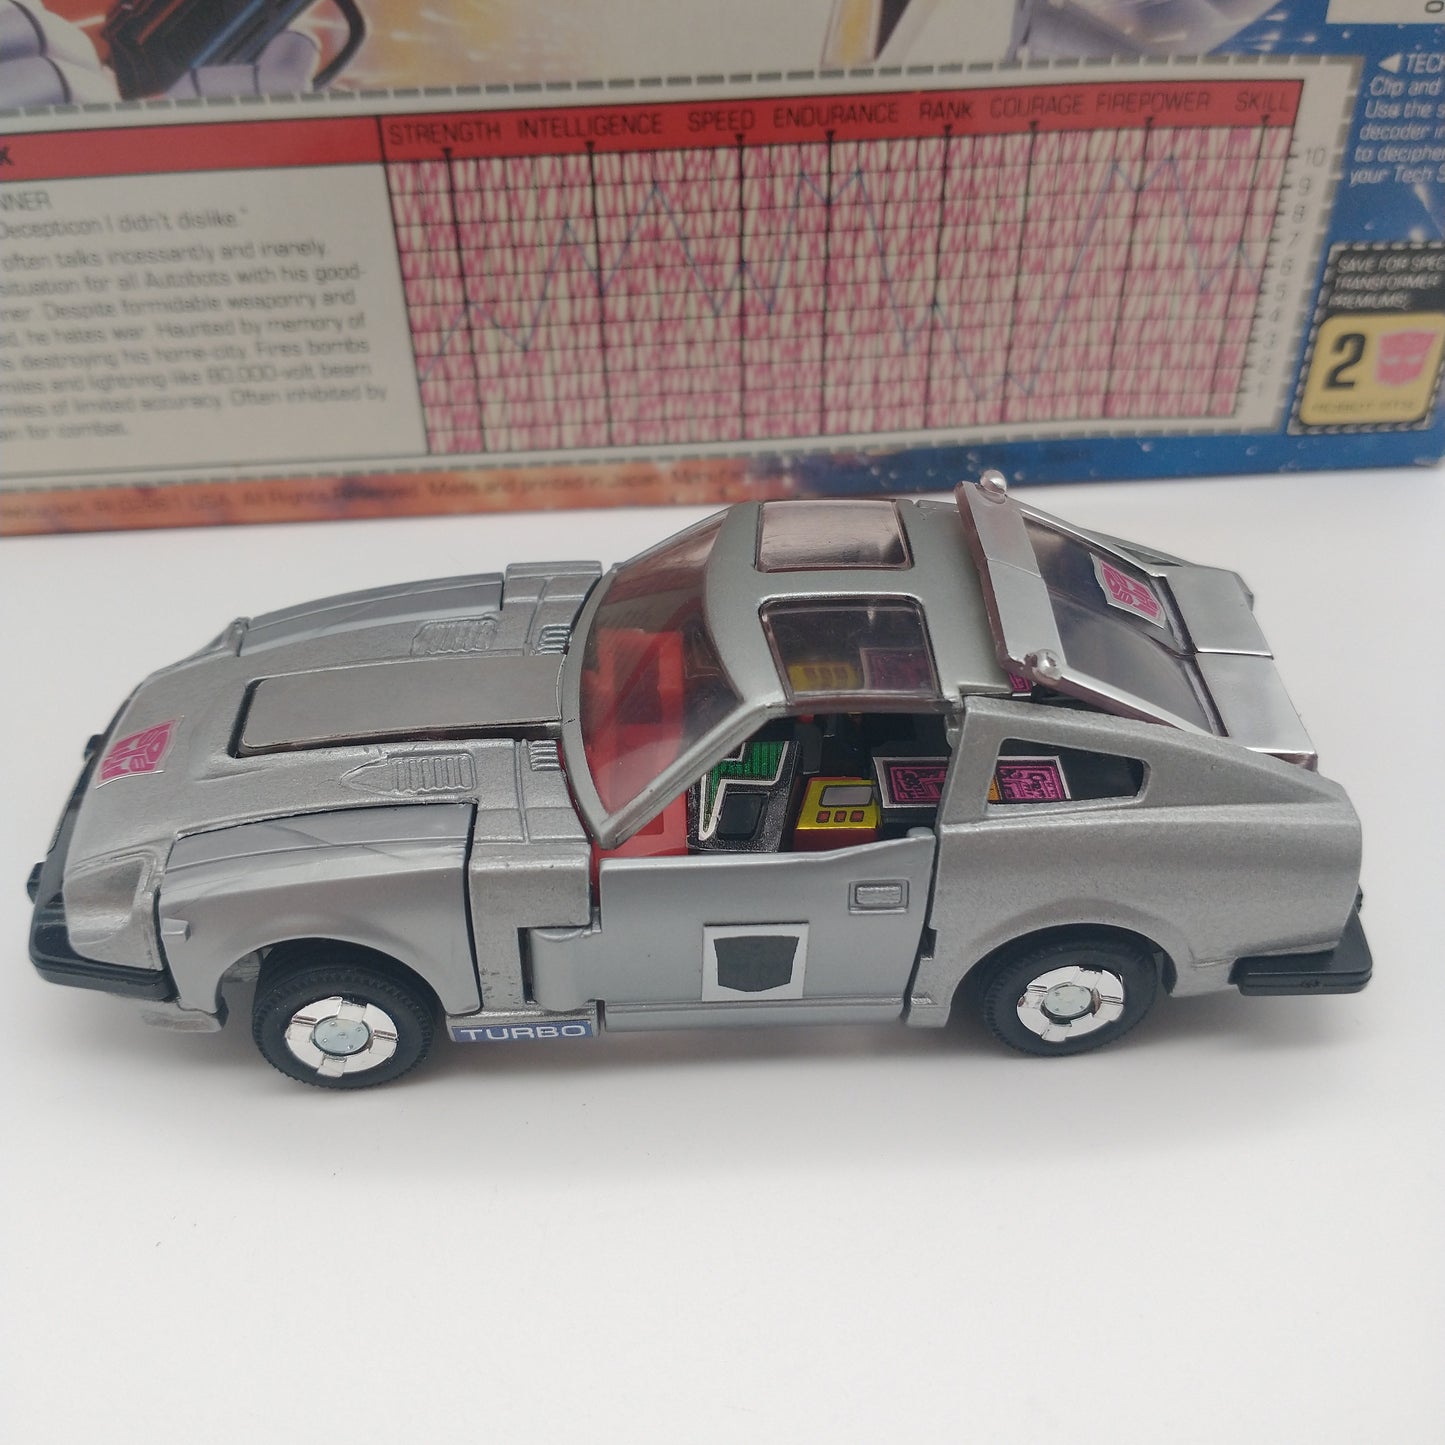 The side of the toy in car form